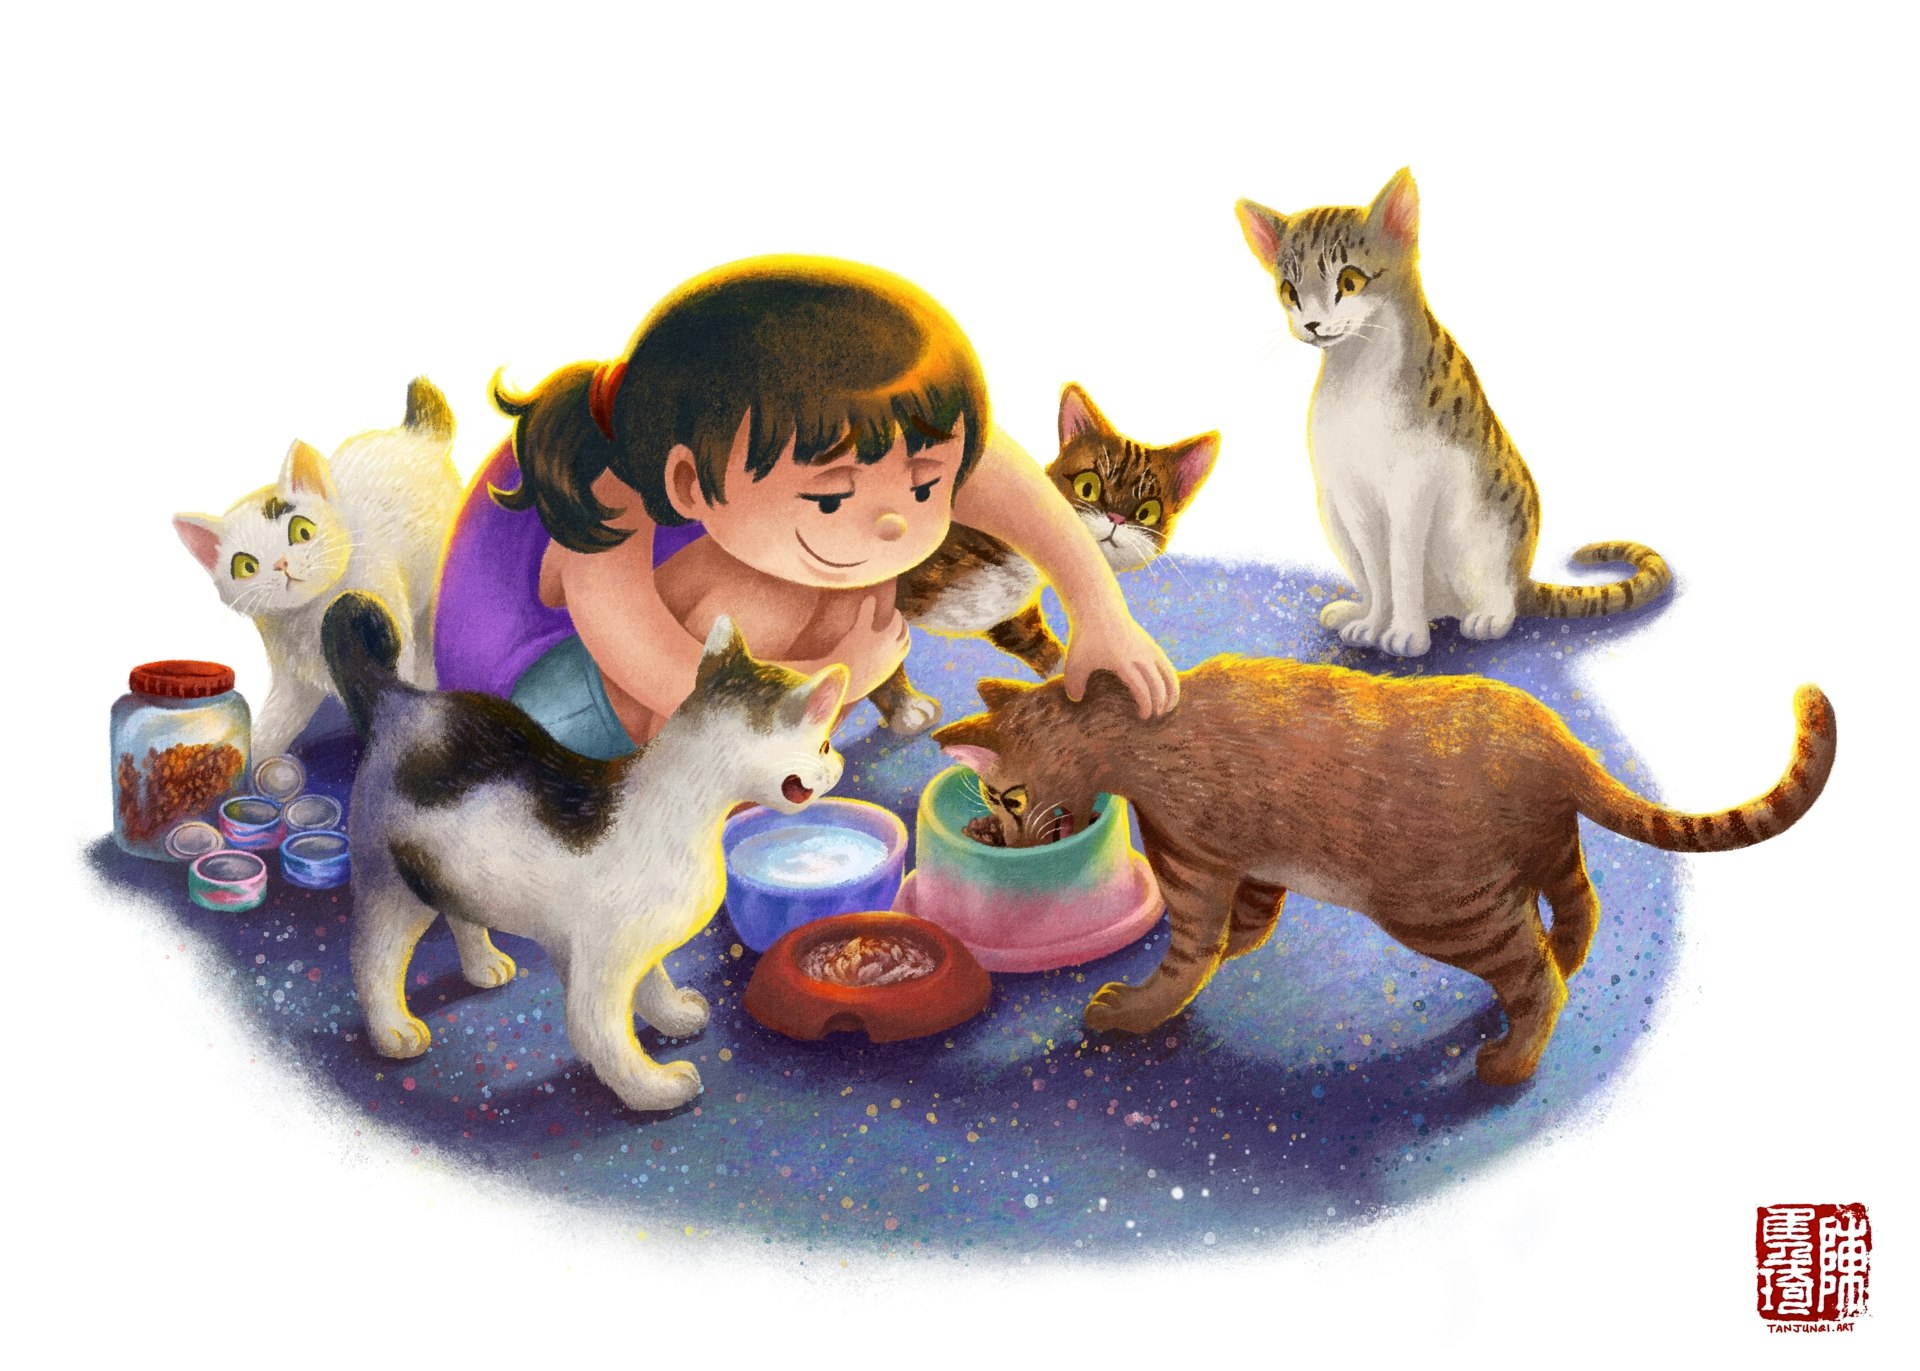 Digital painting of a young girl in a purple tank top and light blue shorts feeding a group of stray cats. She is stroking one of the cats (brown with some tabby markings) who is feeding from a dish in front of her, while the other cats are gathering around and looking eagerly at the food.